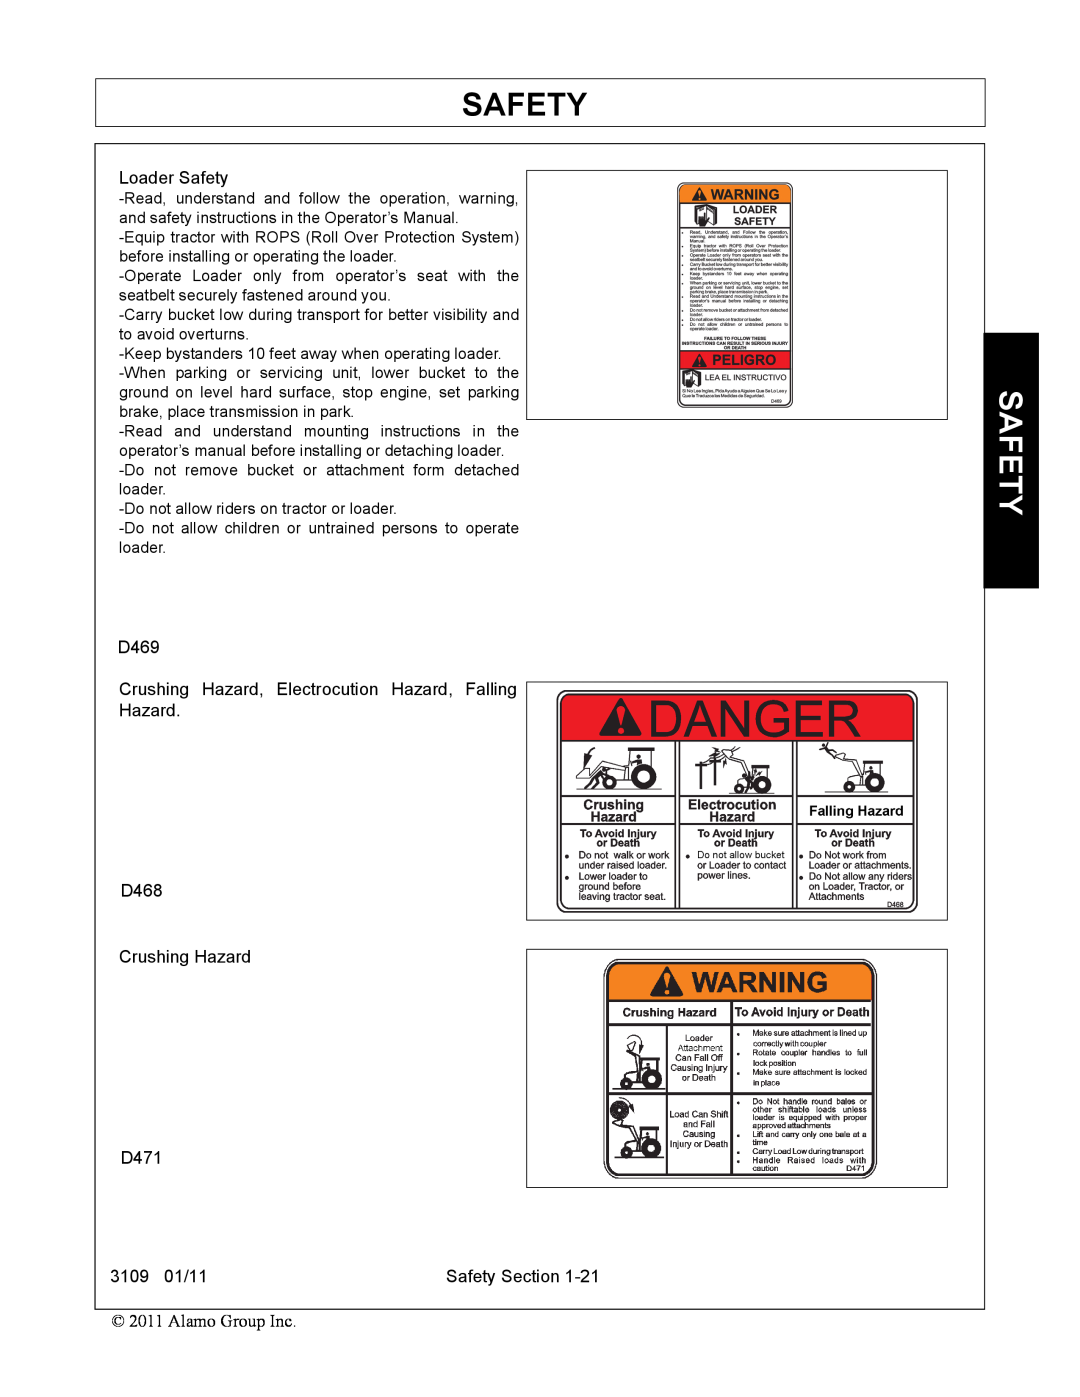 Alamo manual Loader Safety, D469, D468 Crushing Hazard D471, 3109 01/11, Safety Section 